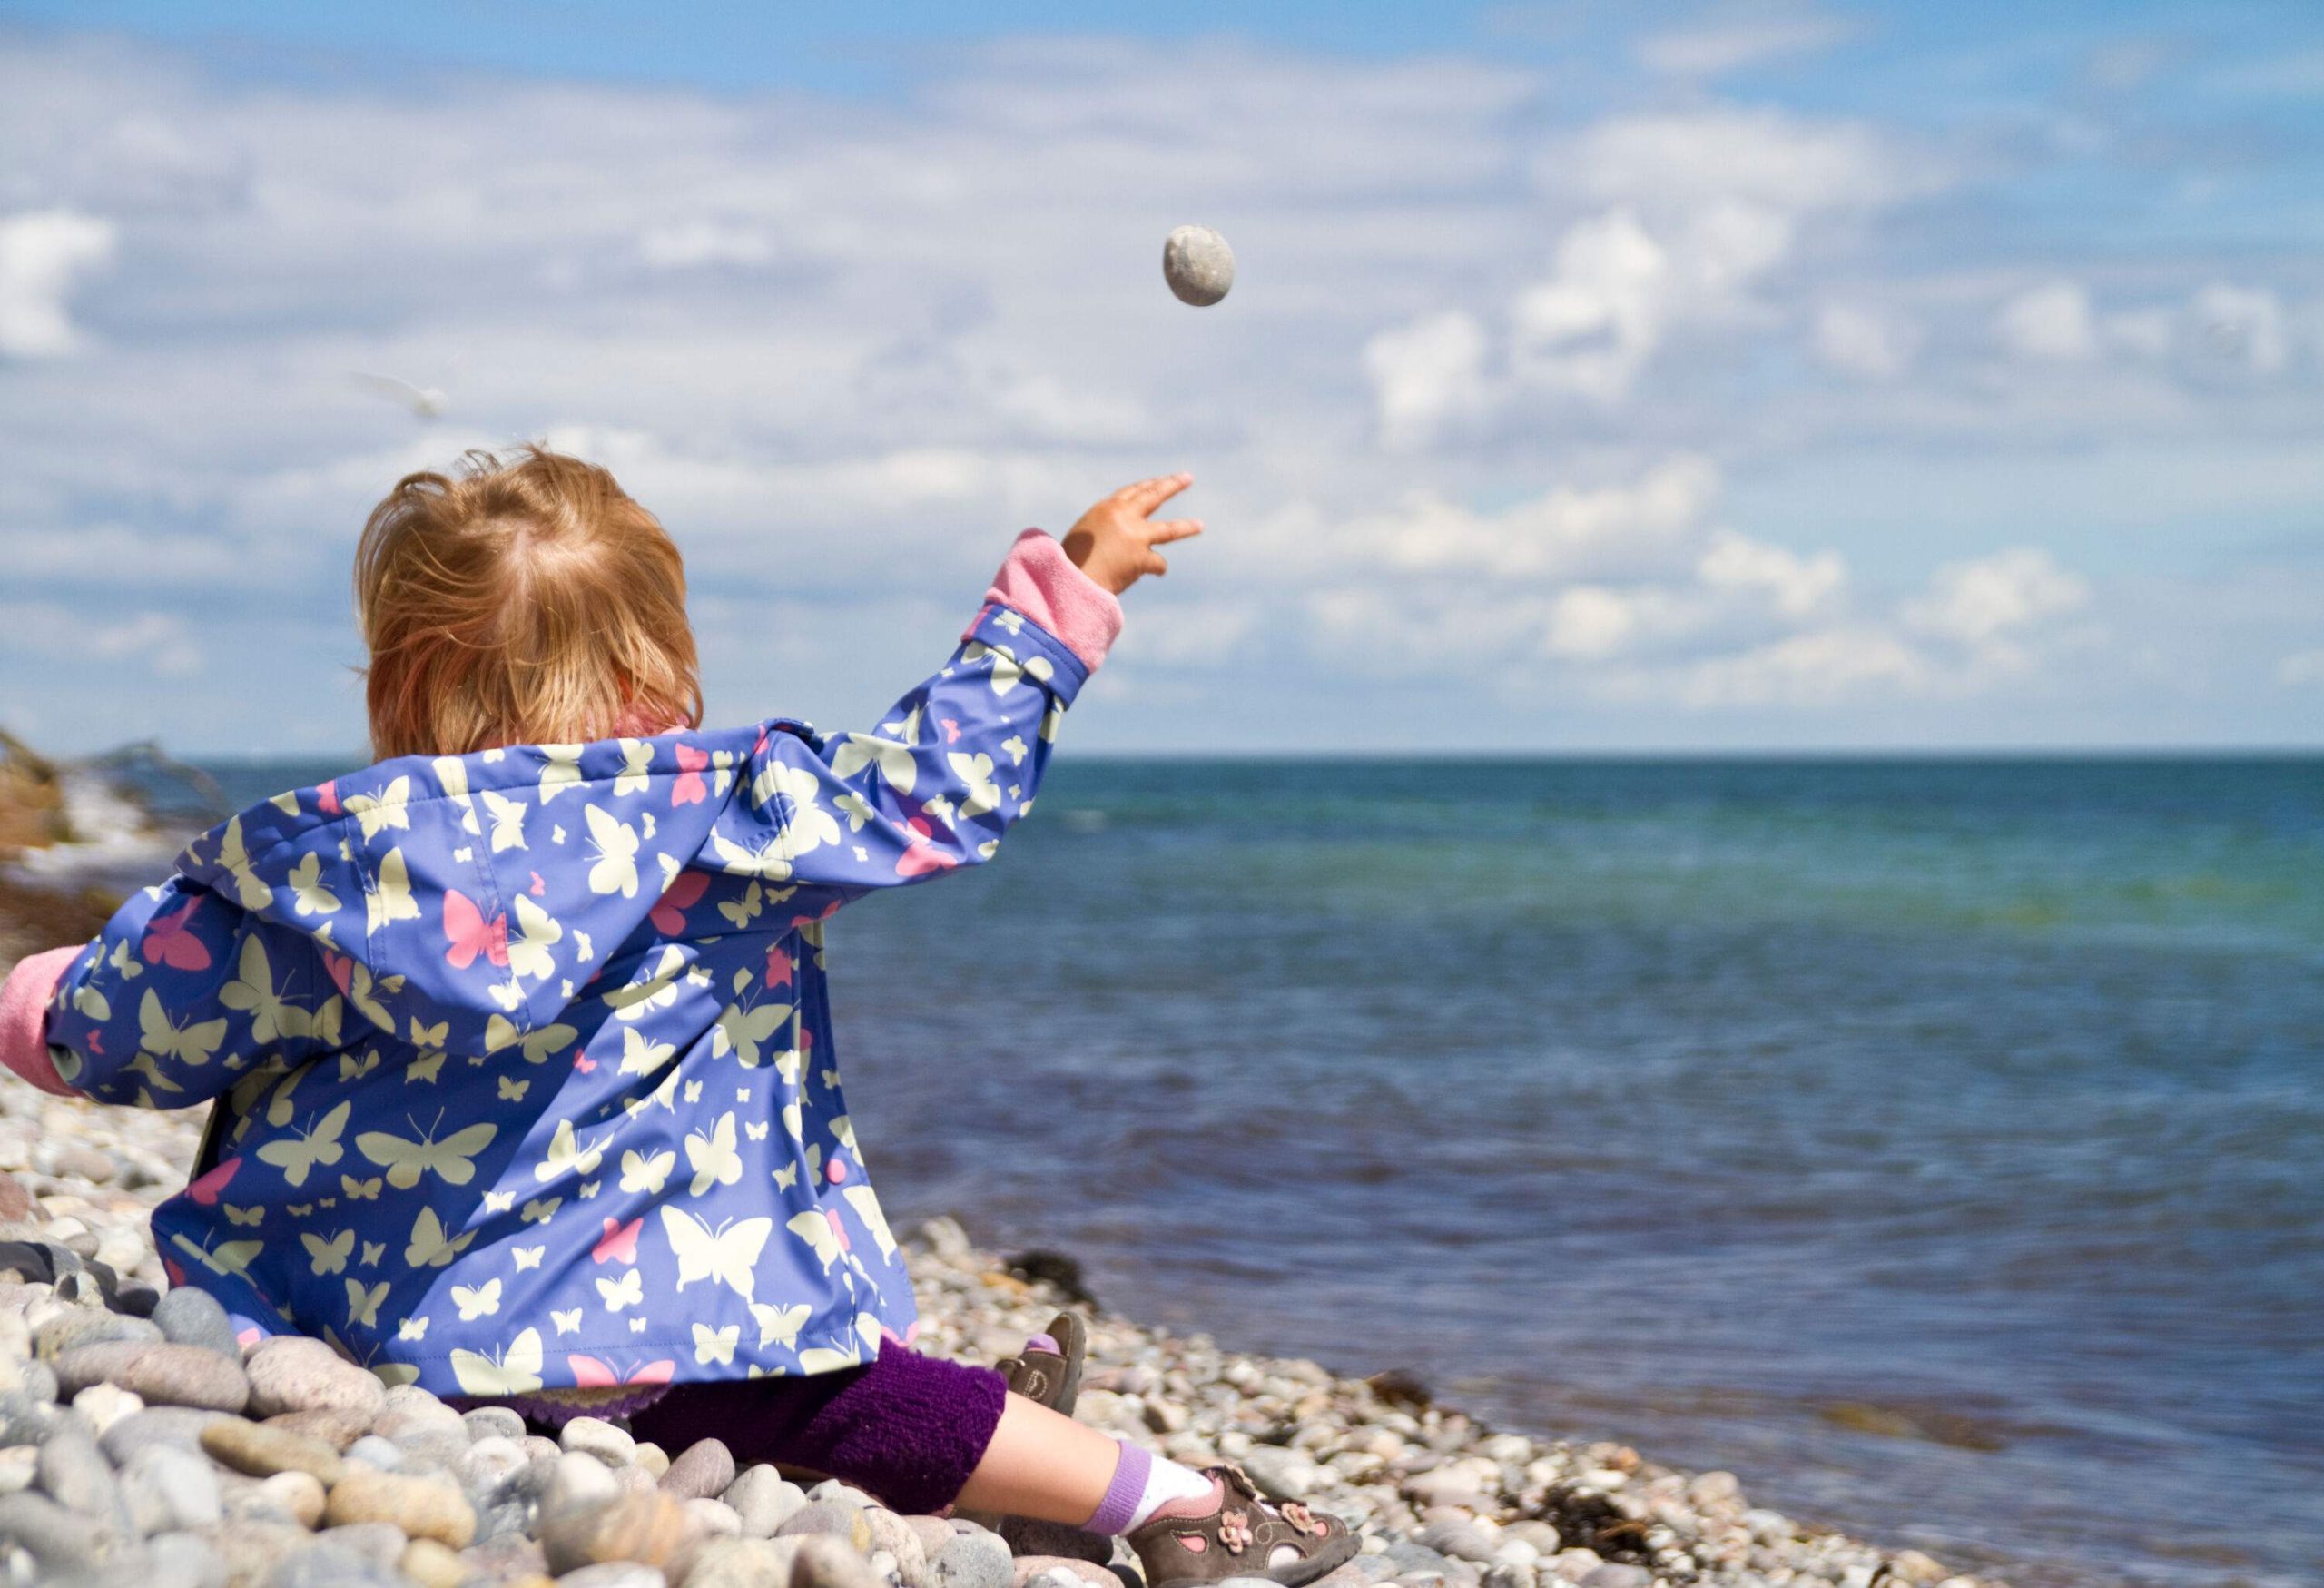 A kid in a butterfly-printed jacket sits on a pebbled beach and throws a stone.